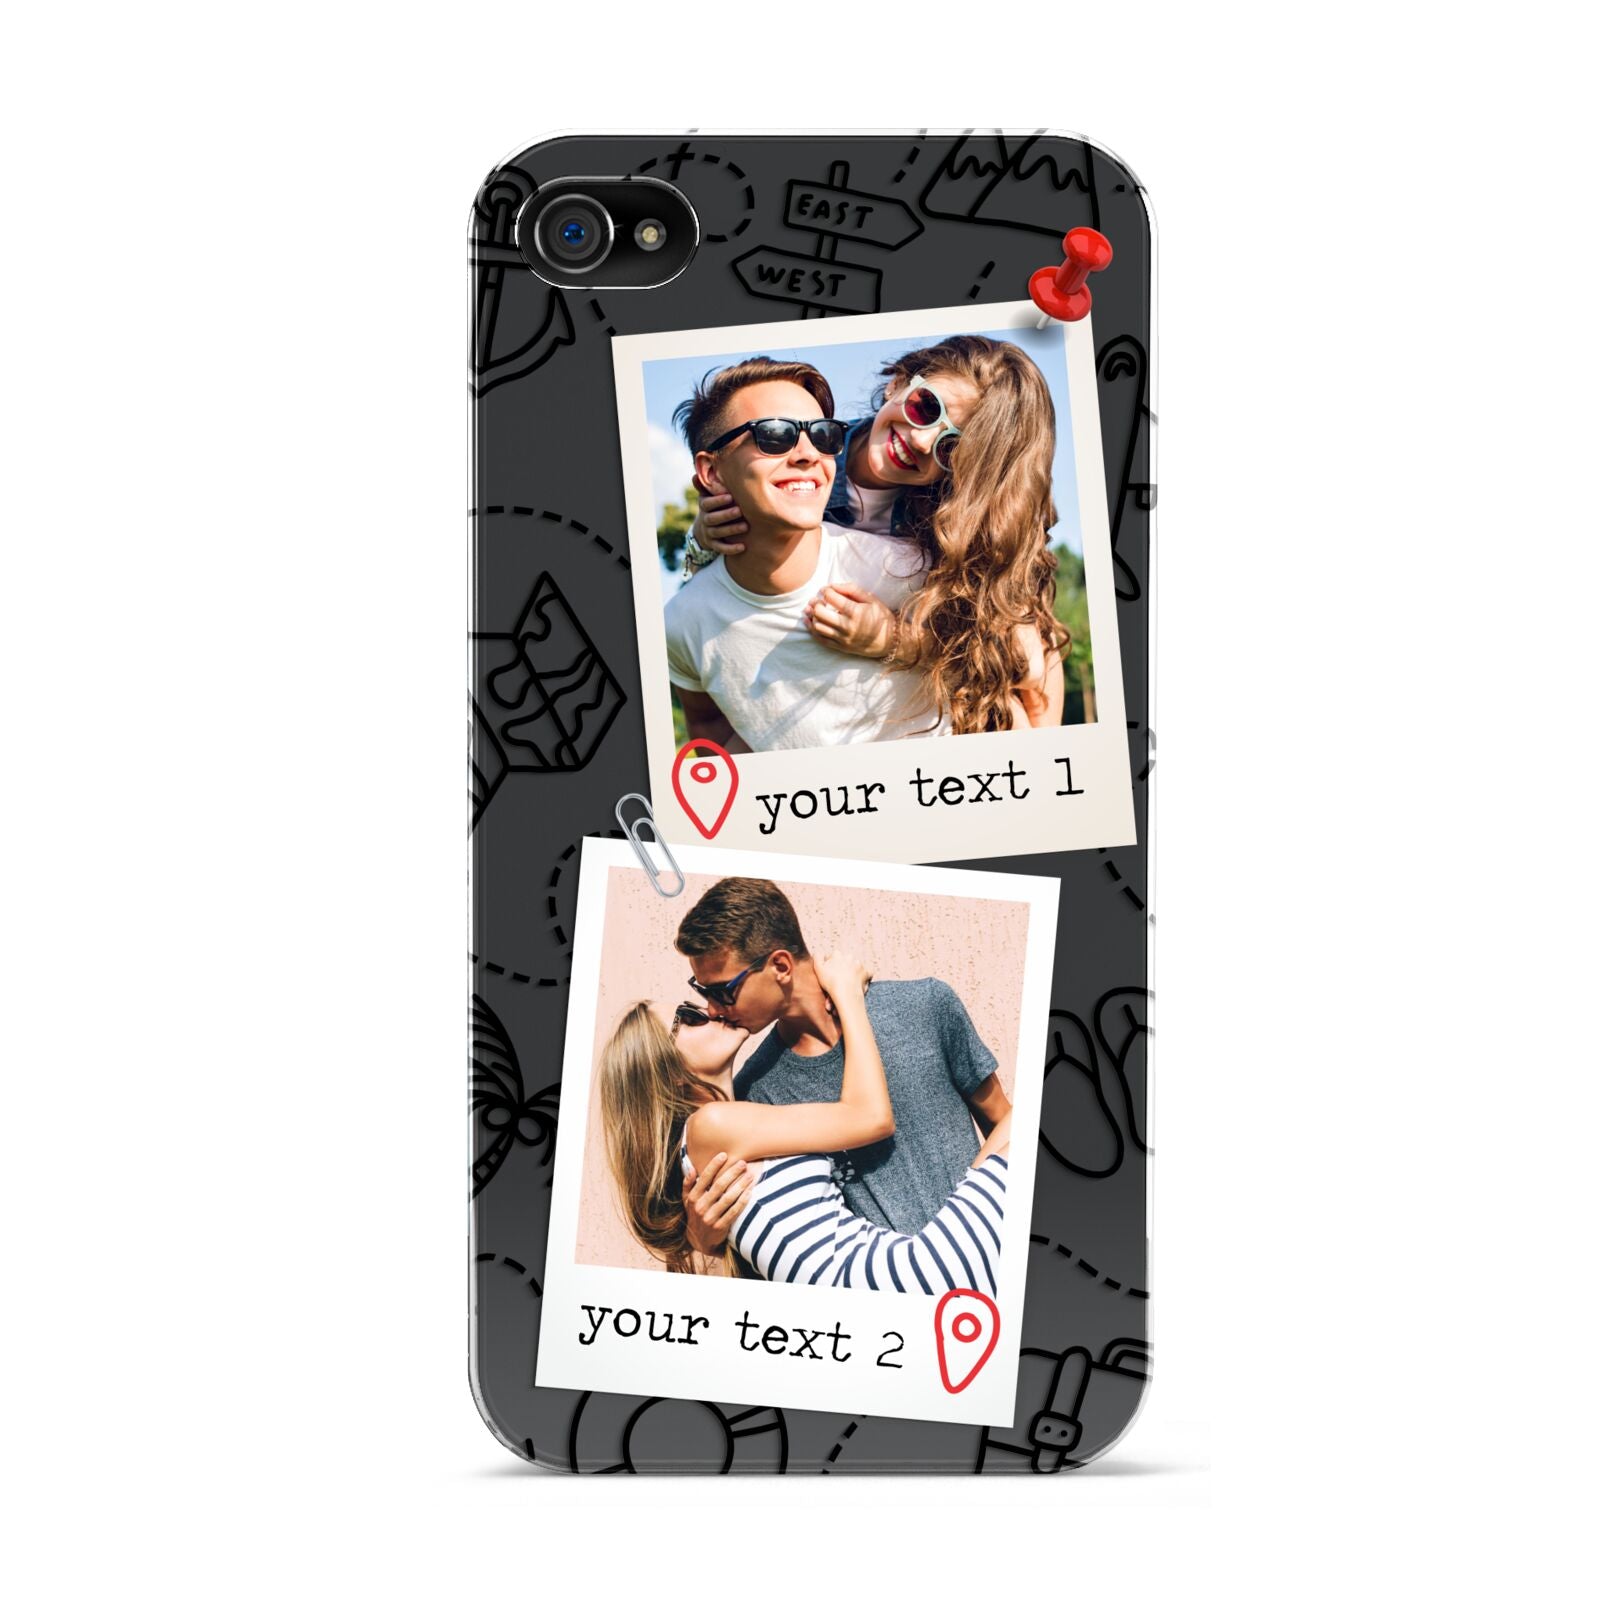 Pinboard Photo Montage Upload Apple iPhone 4s Case